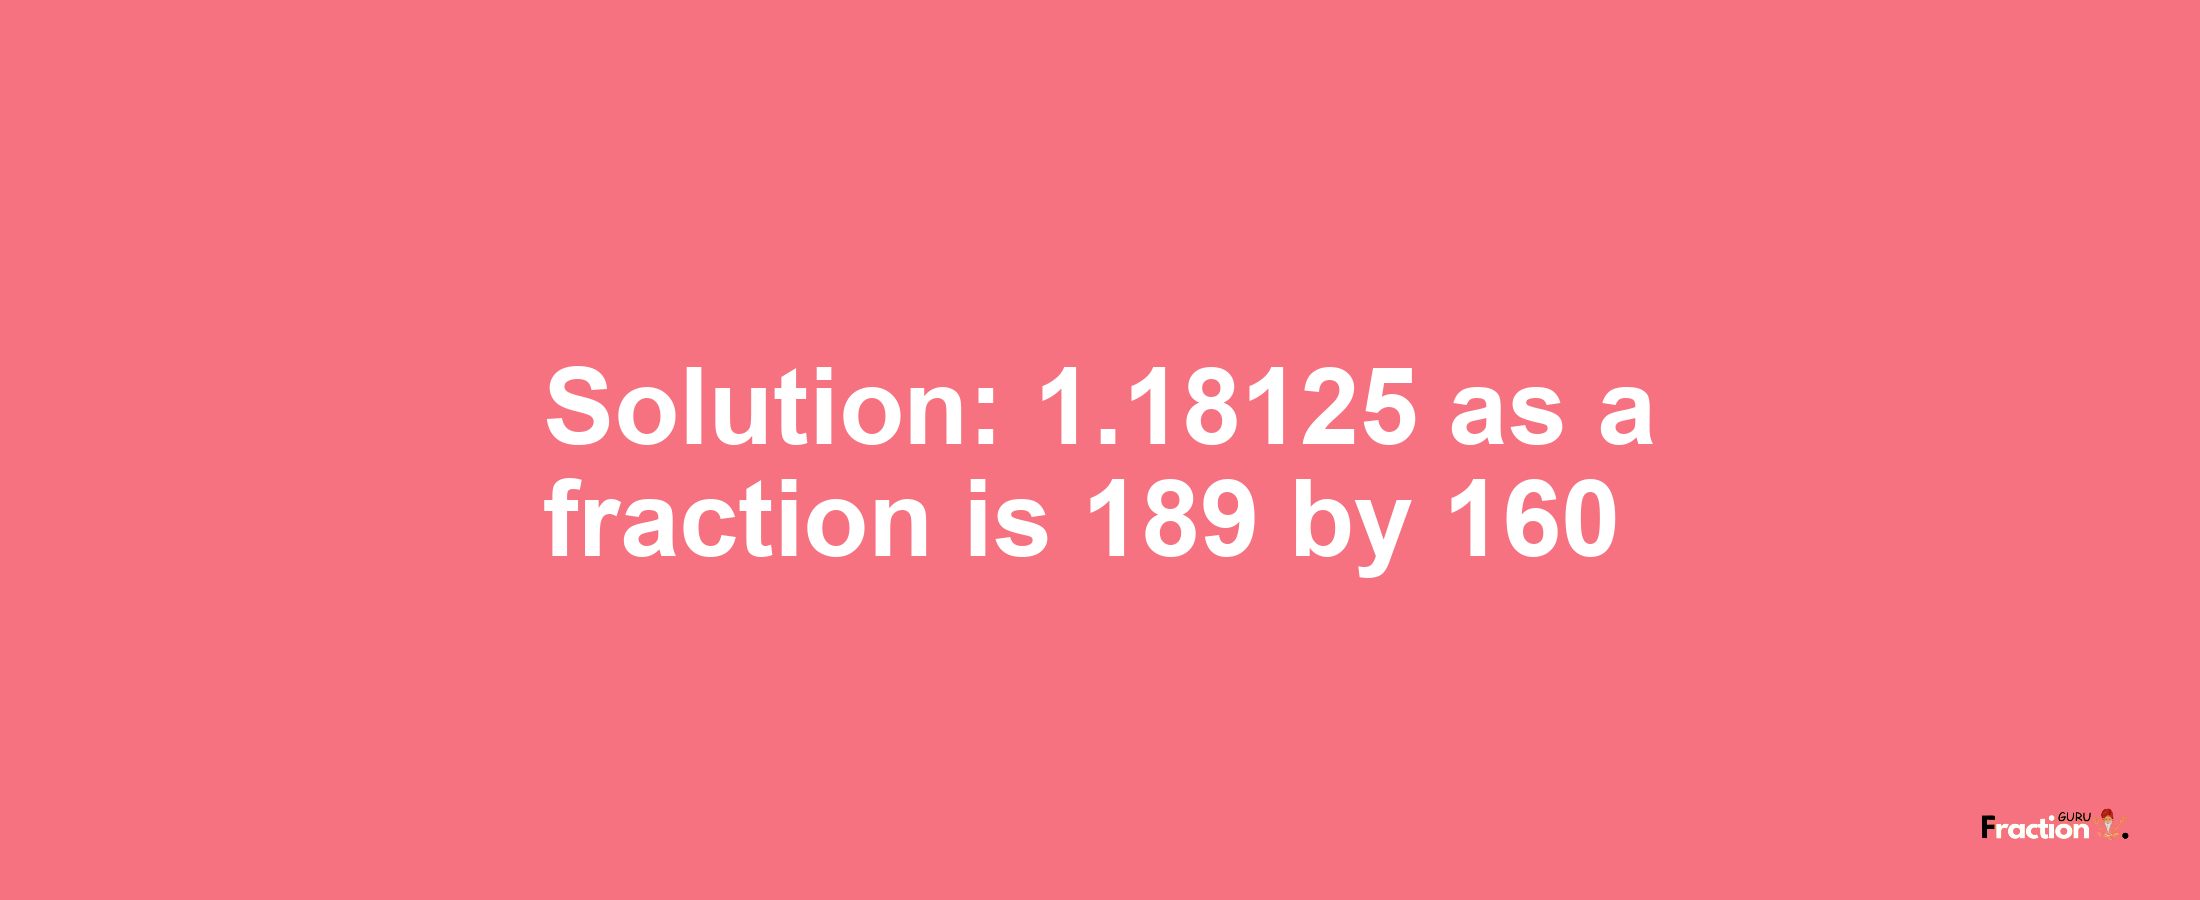 Solution:1.18125 as a fraction is 189/160